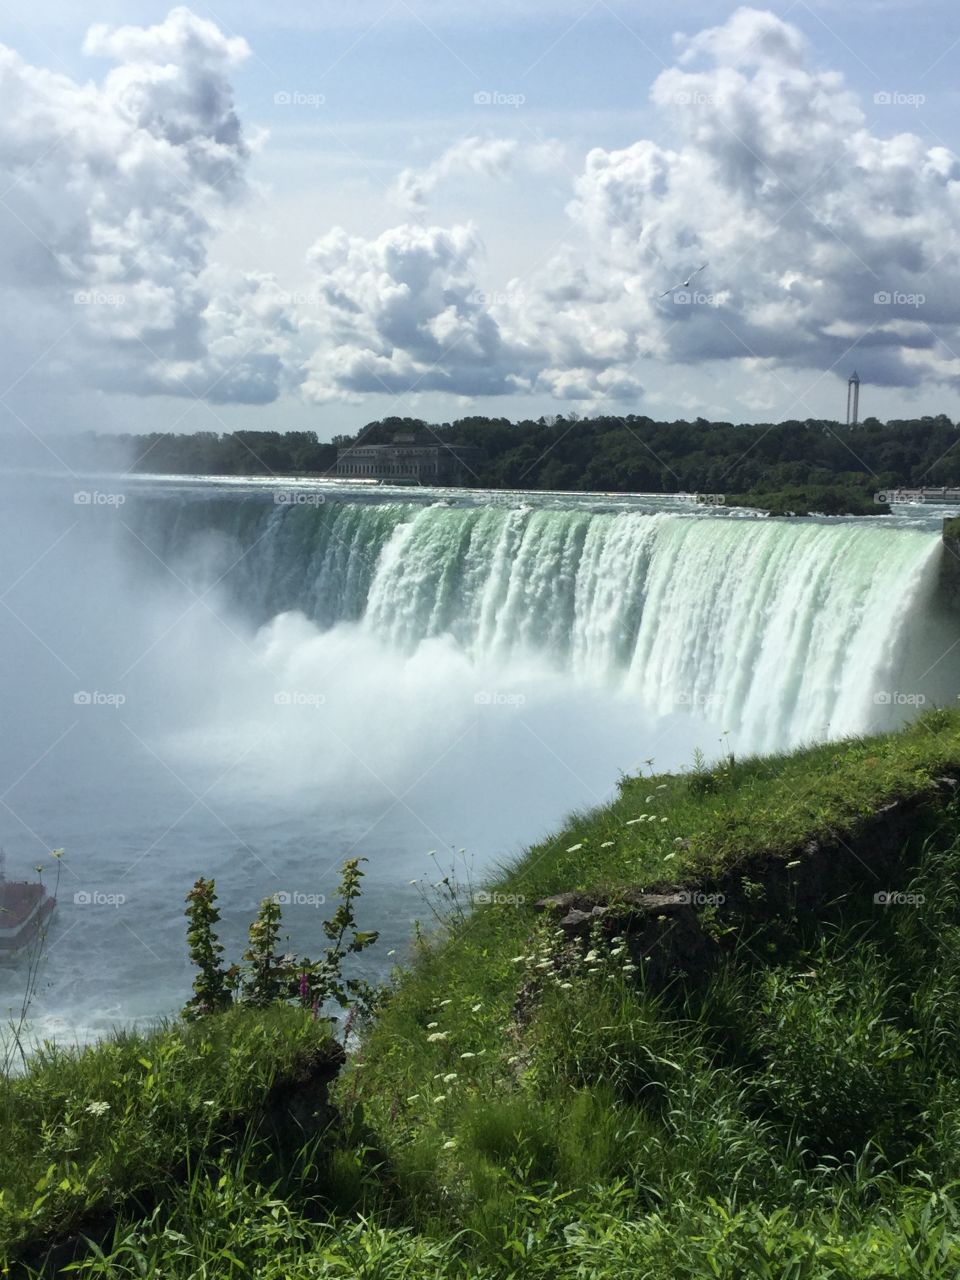 Niagara Falls in summer, view from Canada; the clouds of mist next to the plush green grass: a beautiful representation of nature at its finest; over 3,000 tons of water flowing over the falls every second makes this a perfect view.